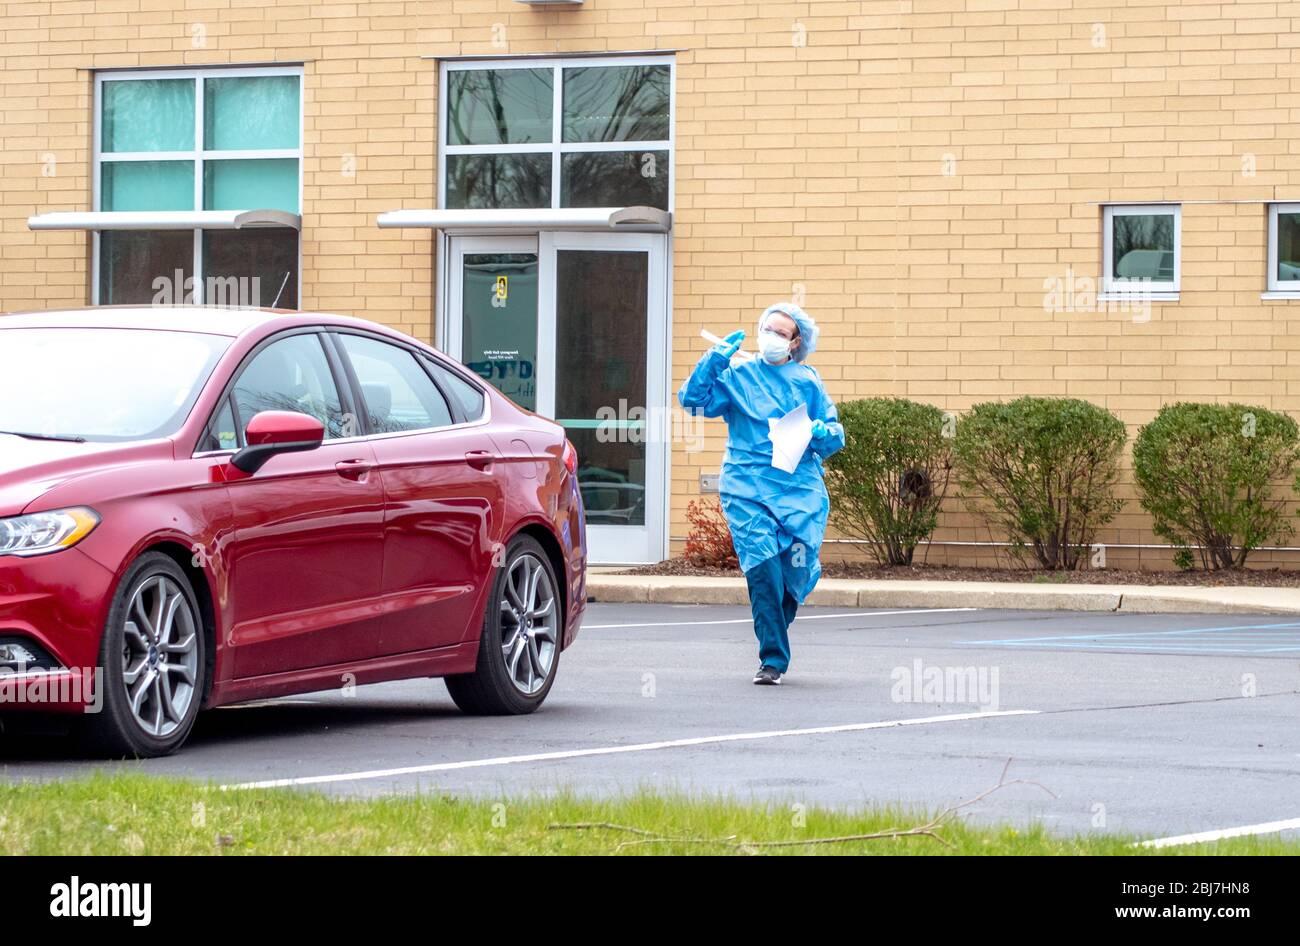 Benton Harbor Michigan USA April 233 2020; A nurse in personal protective gear comes to a car to test a unknown person possibly suffering from covid-1 Stock Photo